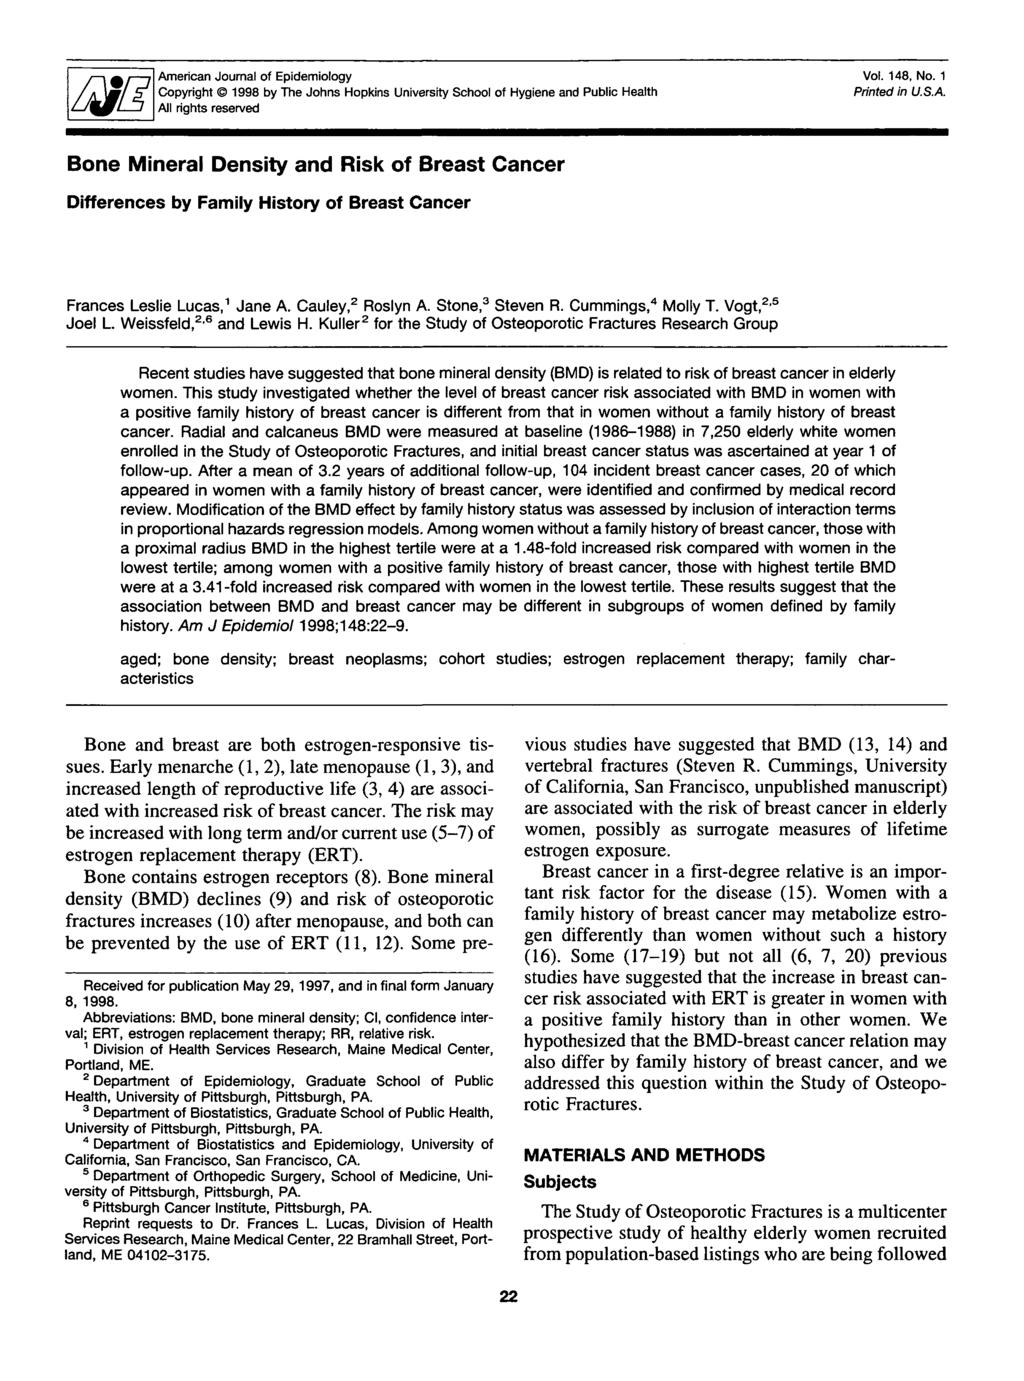 American Journal of Epidemiology Copyright 1998 by The Johns Hopkins University School of Hygiene and Public Health All rights reserved Vol. 148, No. 1 Printed in U.S.A. Bone Mineral Density and Risk of Breast Cancer Differences by Family History of Breast Cancer Frances Leslie Lucas, 1 Jane A.